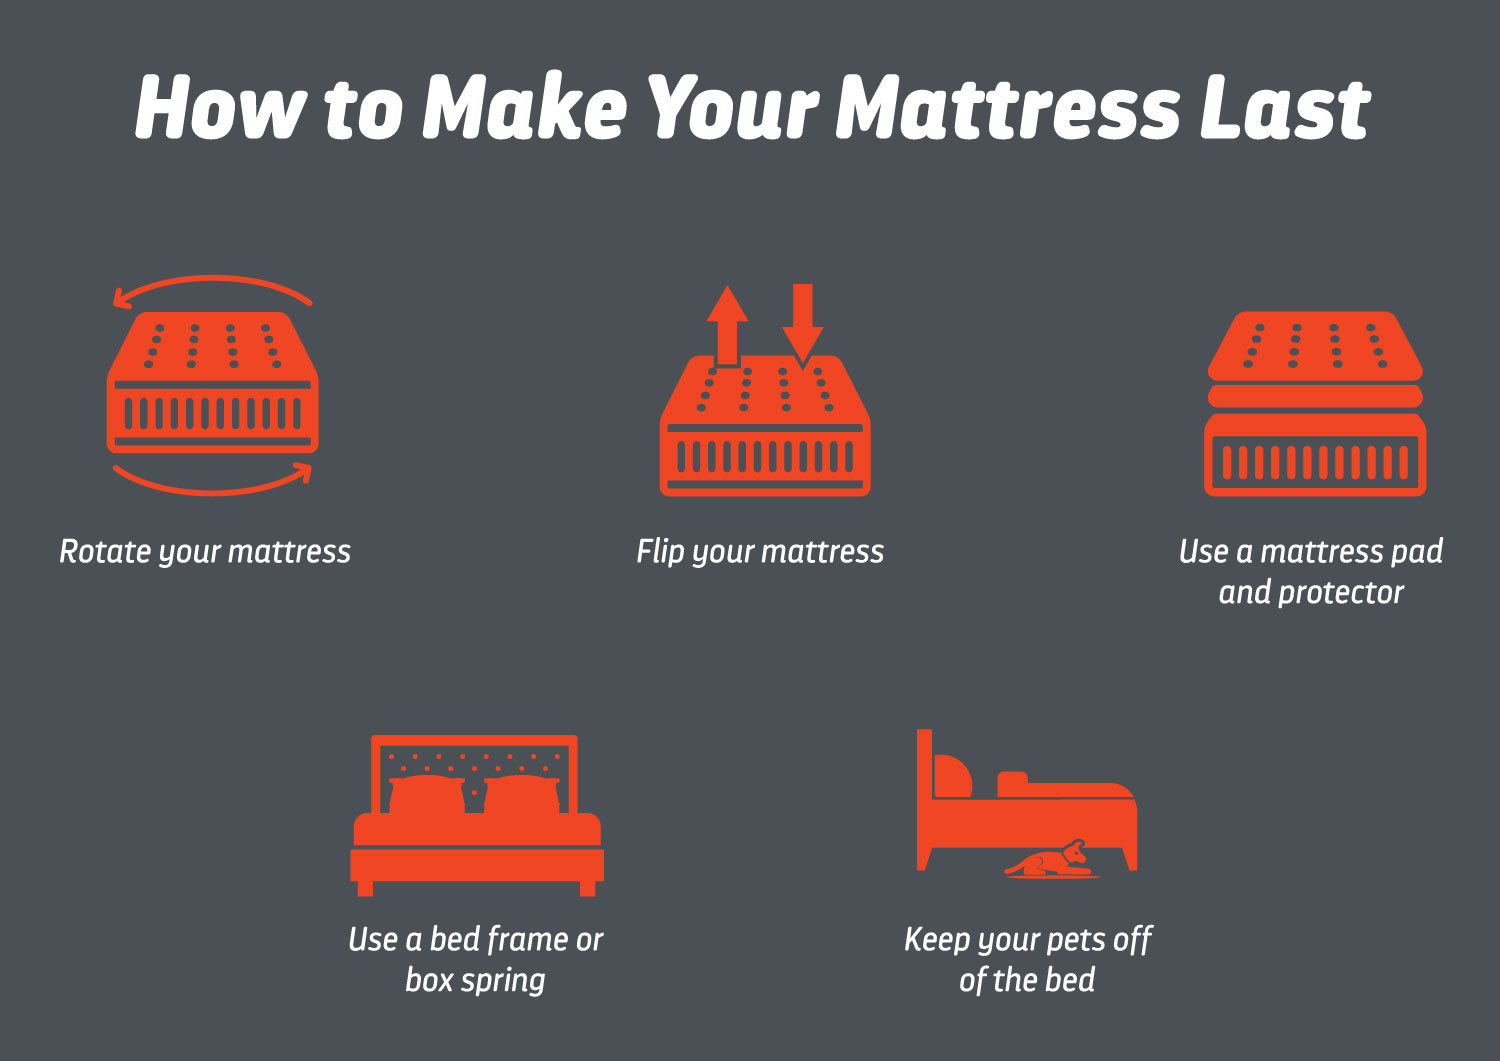 How to Make Your Mattress Last